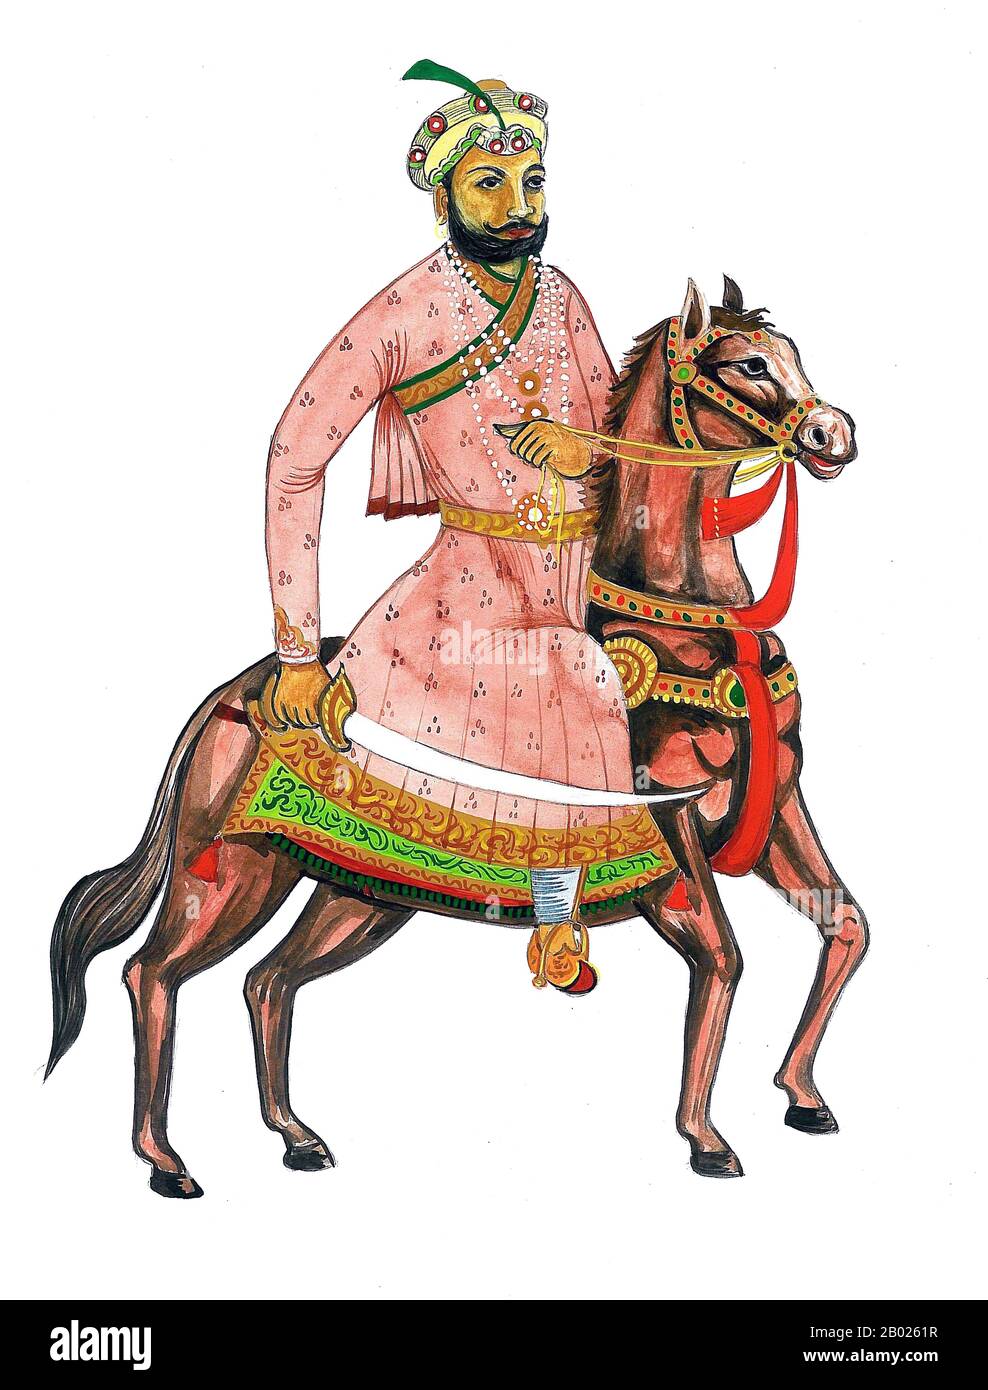 Samrat Hem Chandra Vikramaditya (also known as Hemu Vikramaditya, Raja Vikramaditya or simply Hemu) (1501 – 5 November 1556) was a Hindu emperor of north India during the sixteenth century CE, a period when Mughals and Afghans were vying for power in the region.  The son of a Hindu priest, who later became a food seller, and a vendor of saltpetre at Rewari, Hemu rose to become Chief of Army and Prime Minister of Adil Shah Suri of the Suri Dynasty. He fought Afghan rebels across North India from the Punjab to Bengal and the Mughal forces of Akbar and Humayun in Agra and Delhi, winning 22 consec Stock Photo